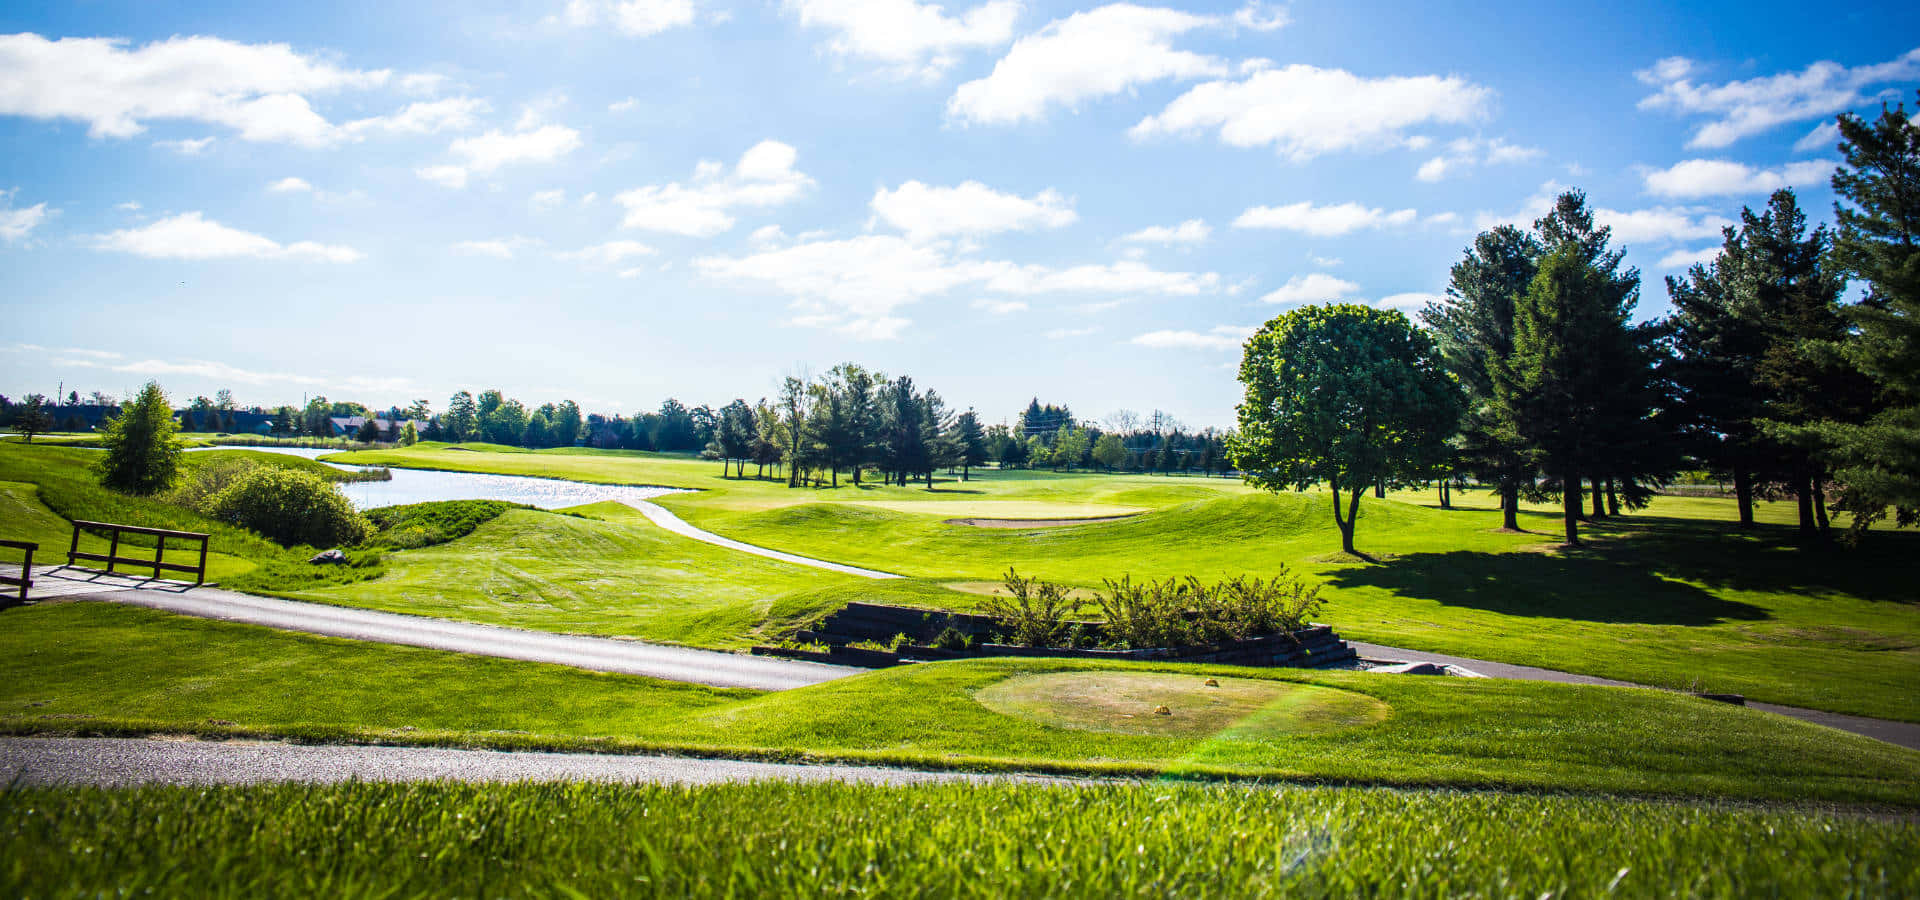 Enjoy the vast expanse at this scenic Golf Course